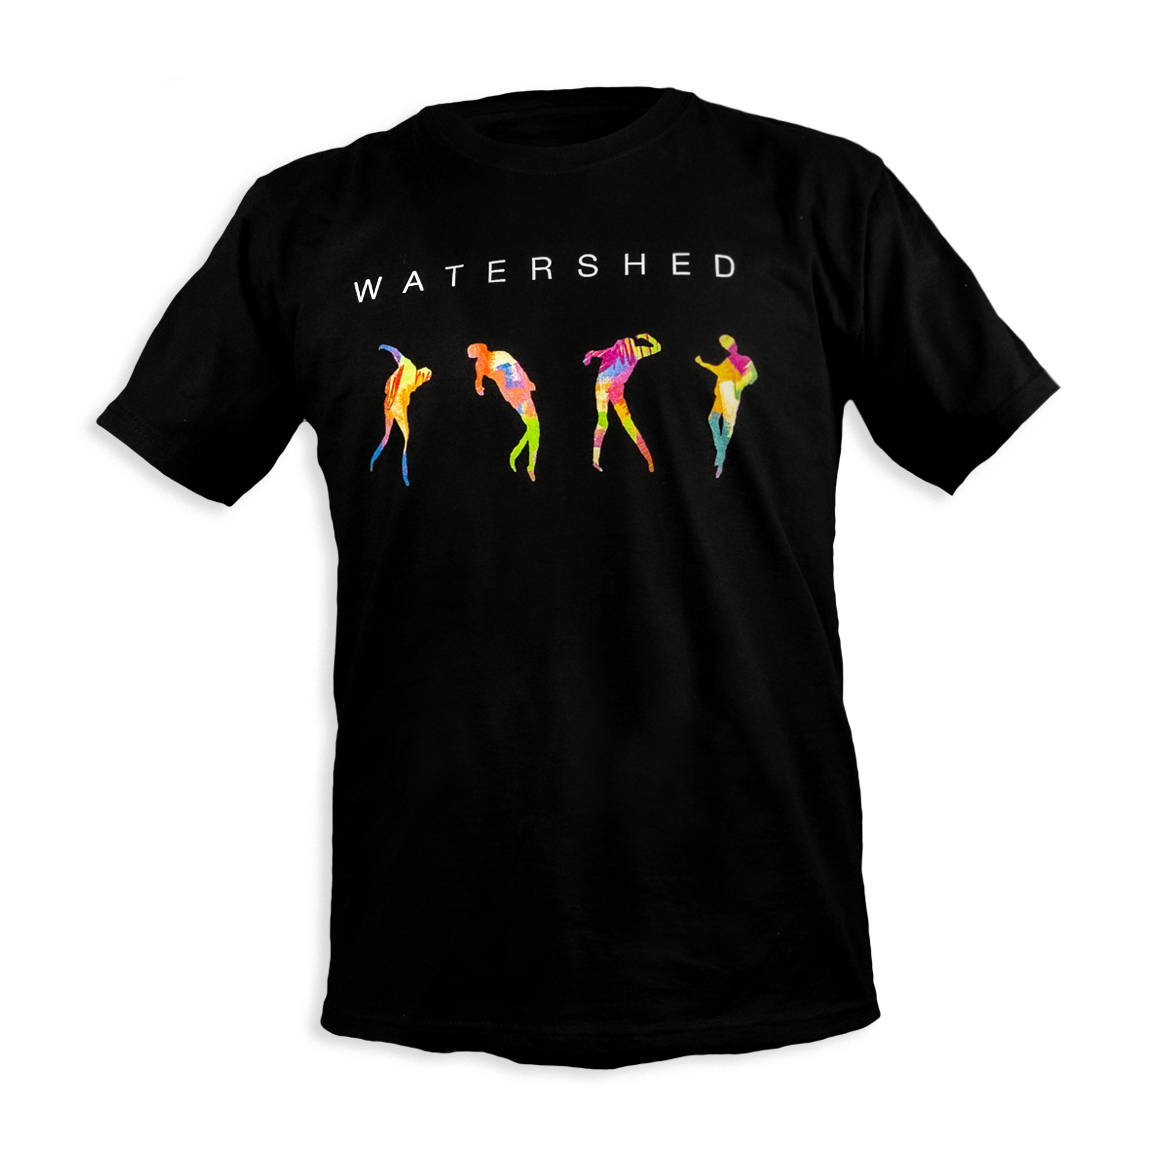 Watershed - Elephant In The Room, T-Shirt